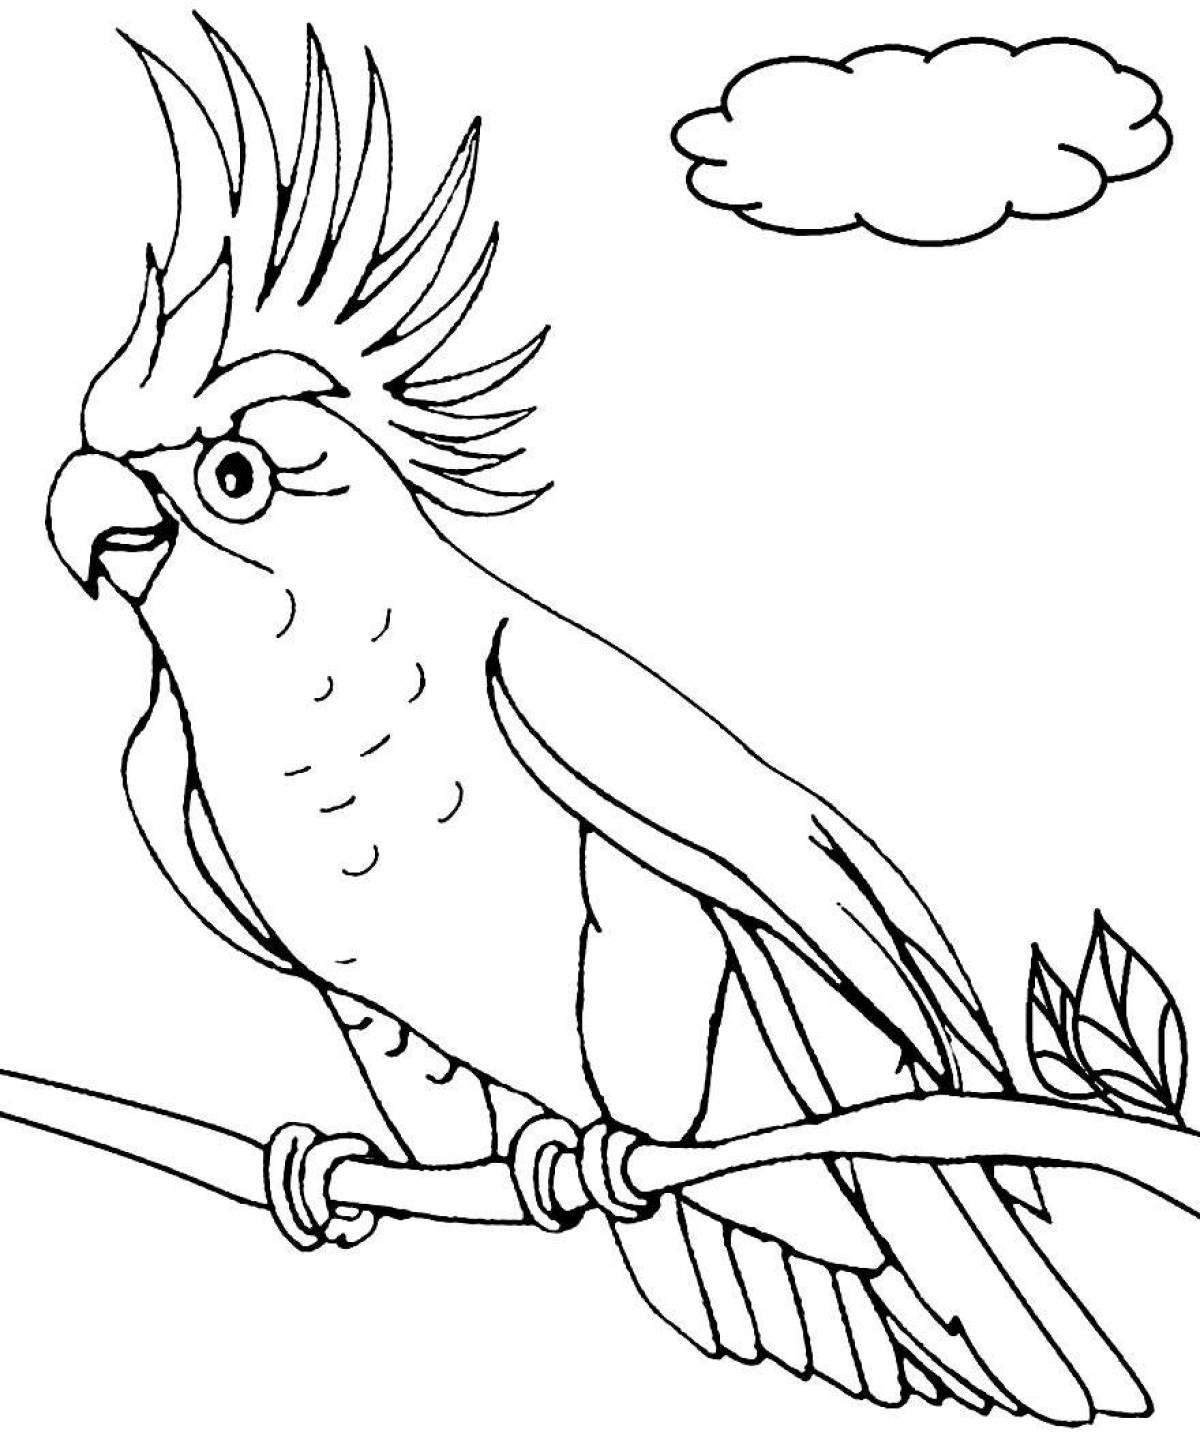 Incredible parrot coloring book for kids